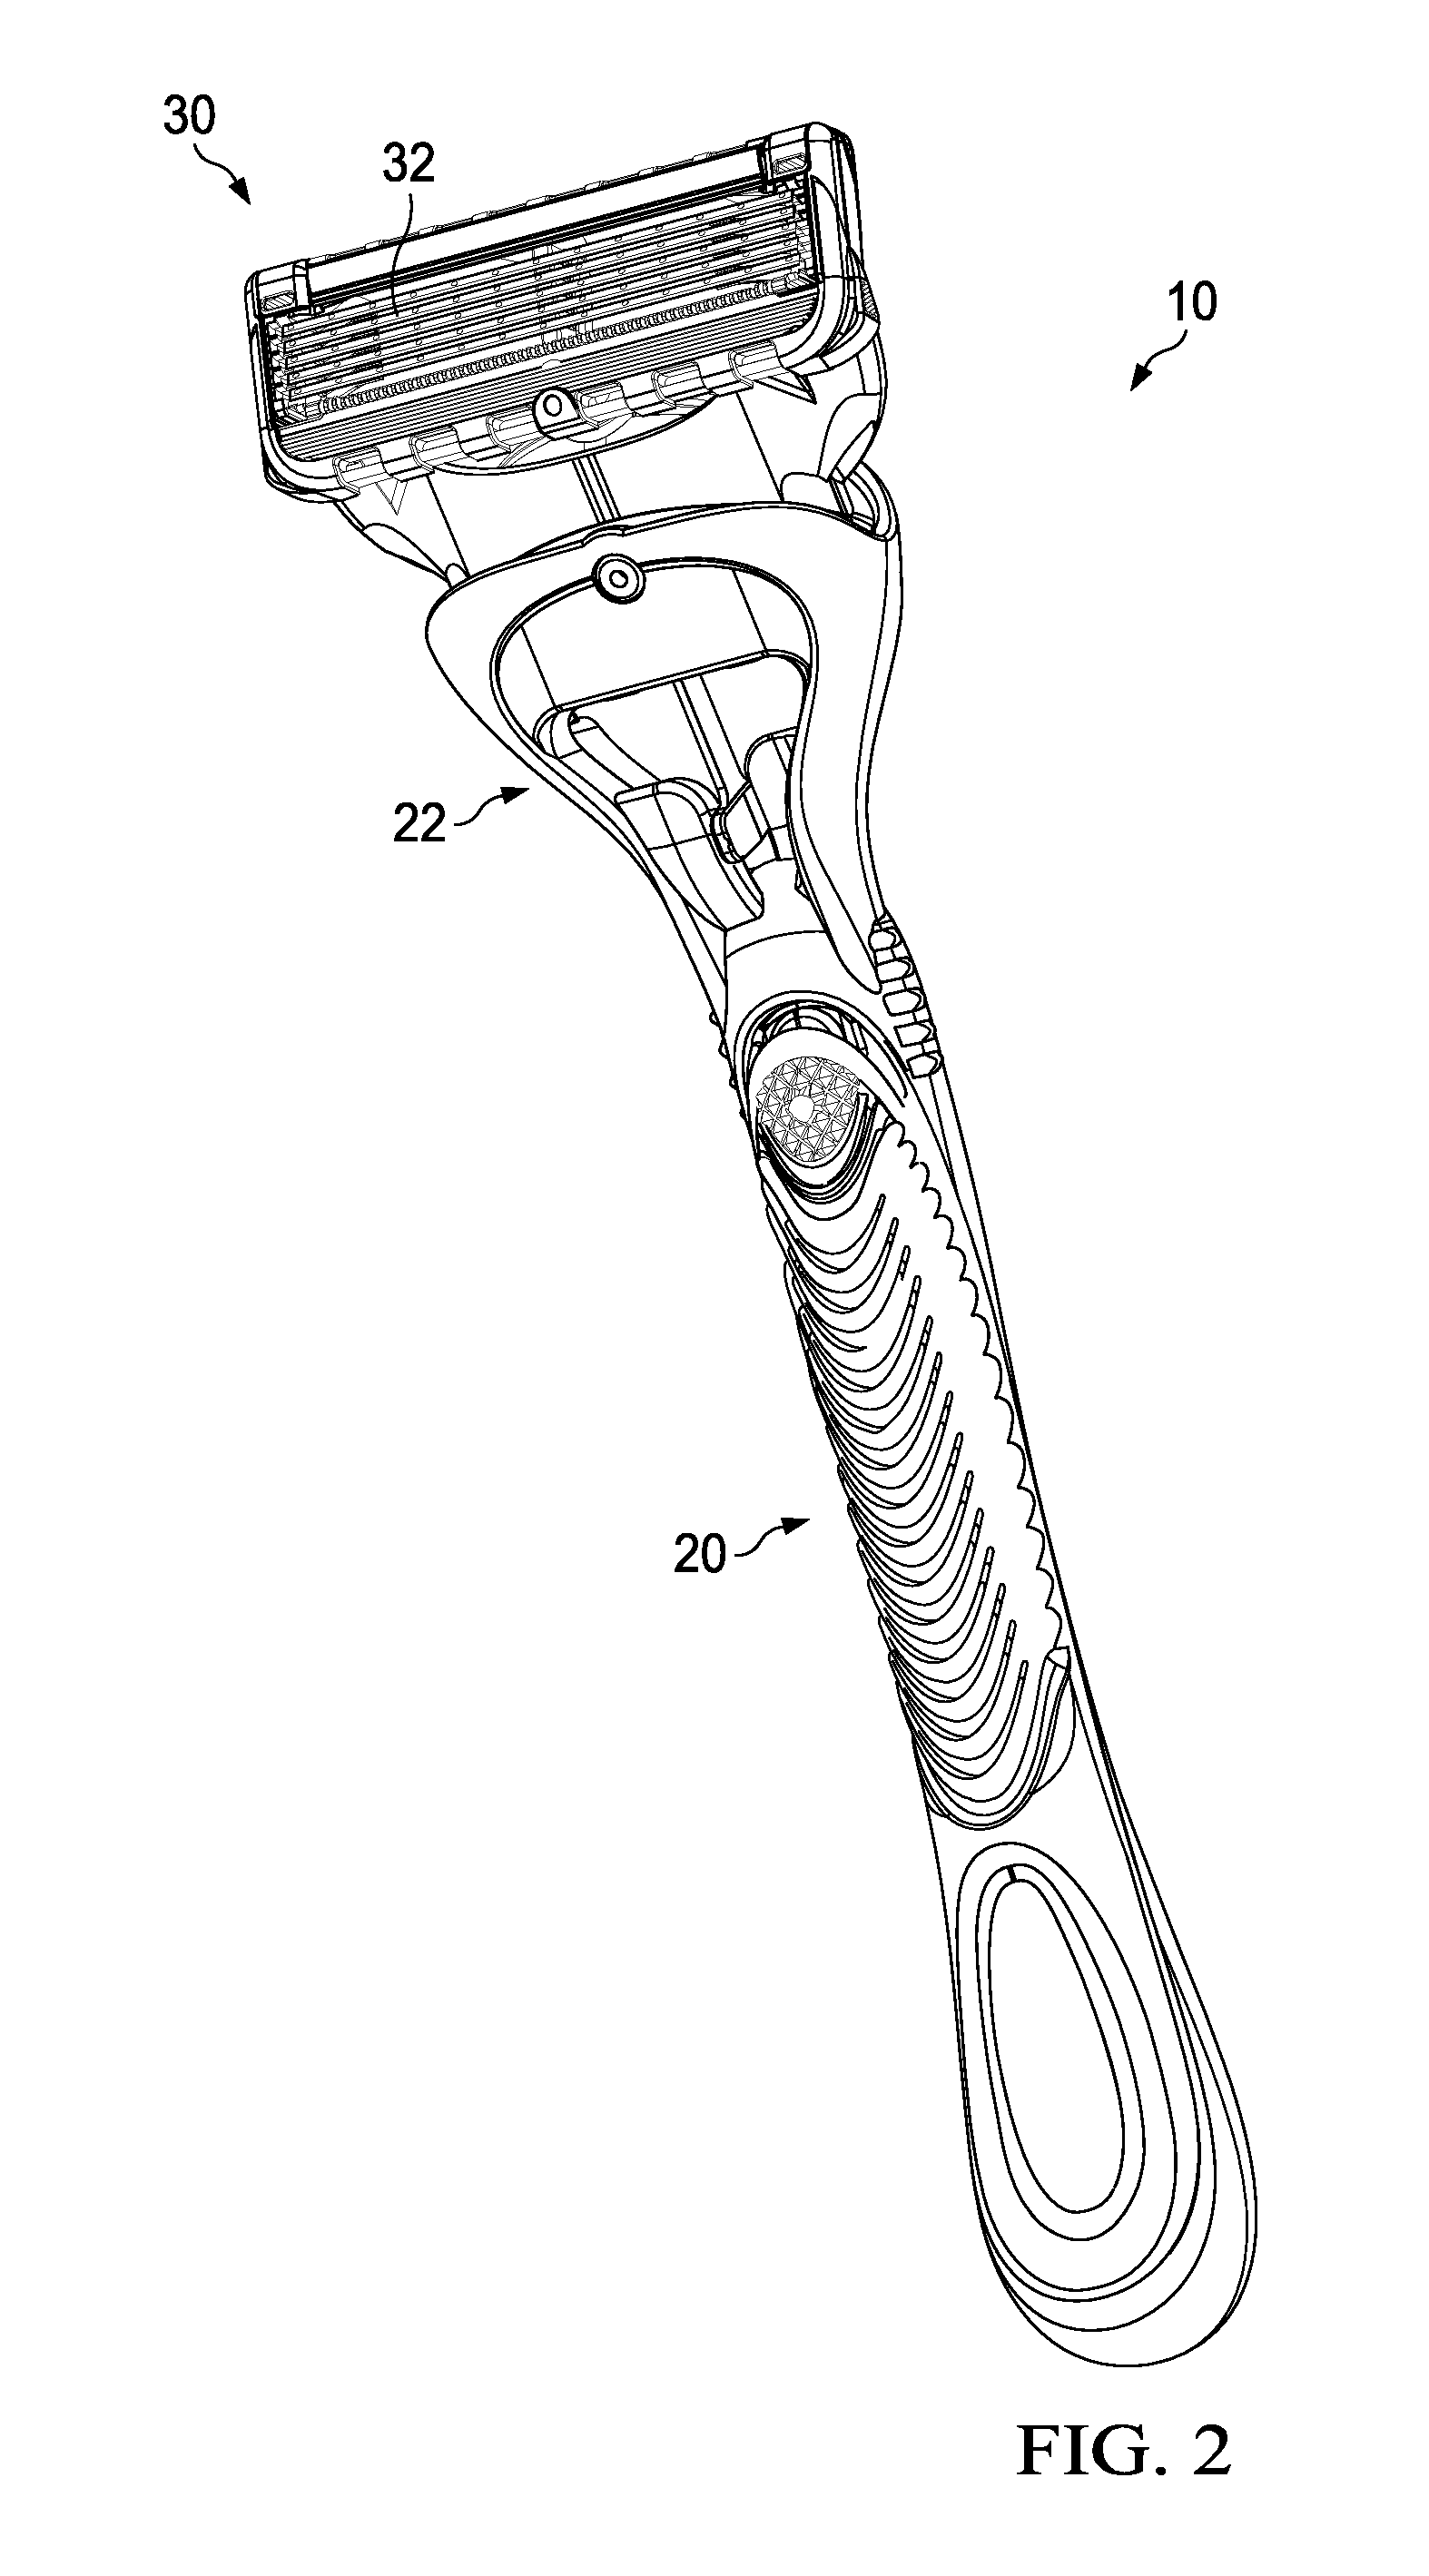 Razor handle with a rotatable portion